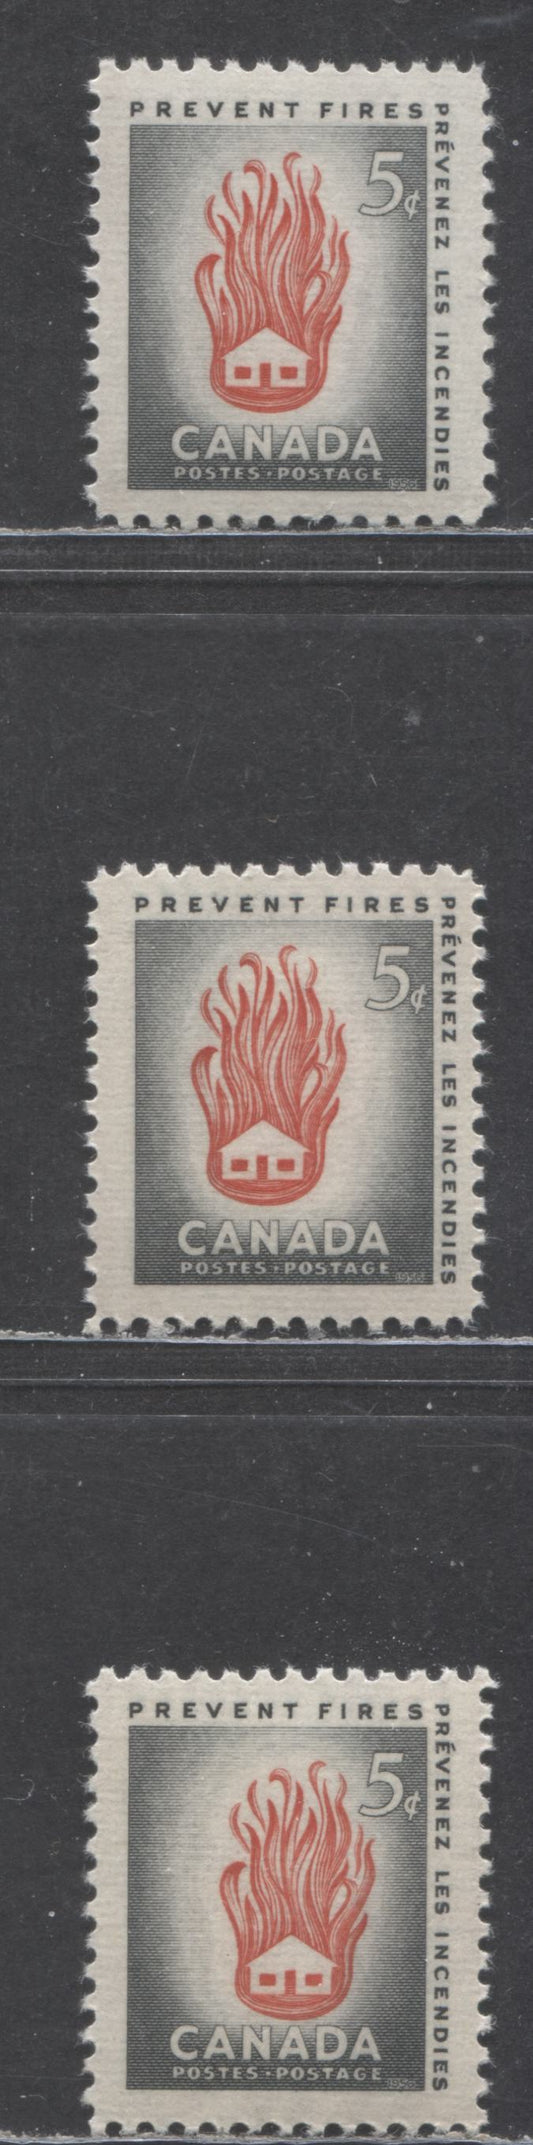 Lot 408 Canada #364 5c Olive Grey & Vermilion House On Fire, 1956 Fire Prevention Issue, 3 VFNH Singles, Horizontally Ribbed Paper, Cream Semi-Gloss Gum With Shifted Vignettes